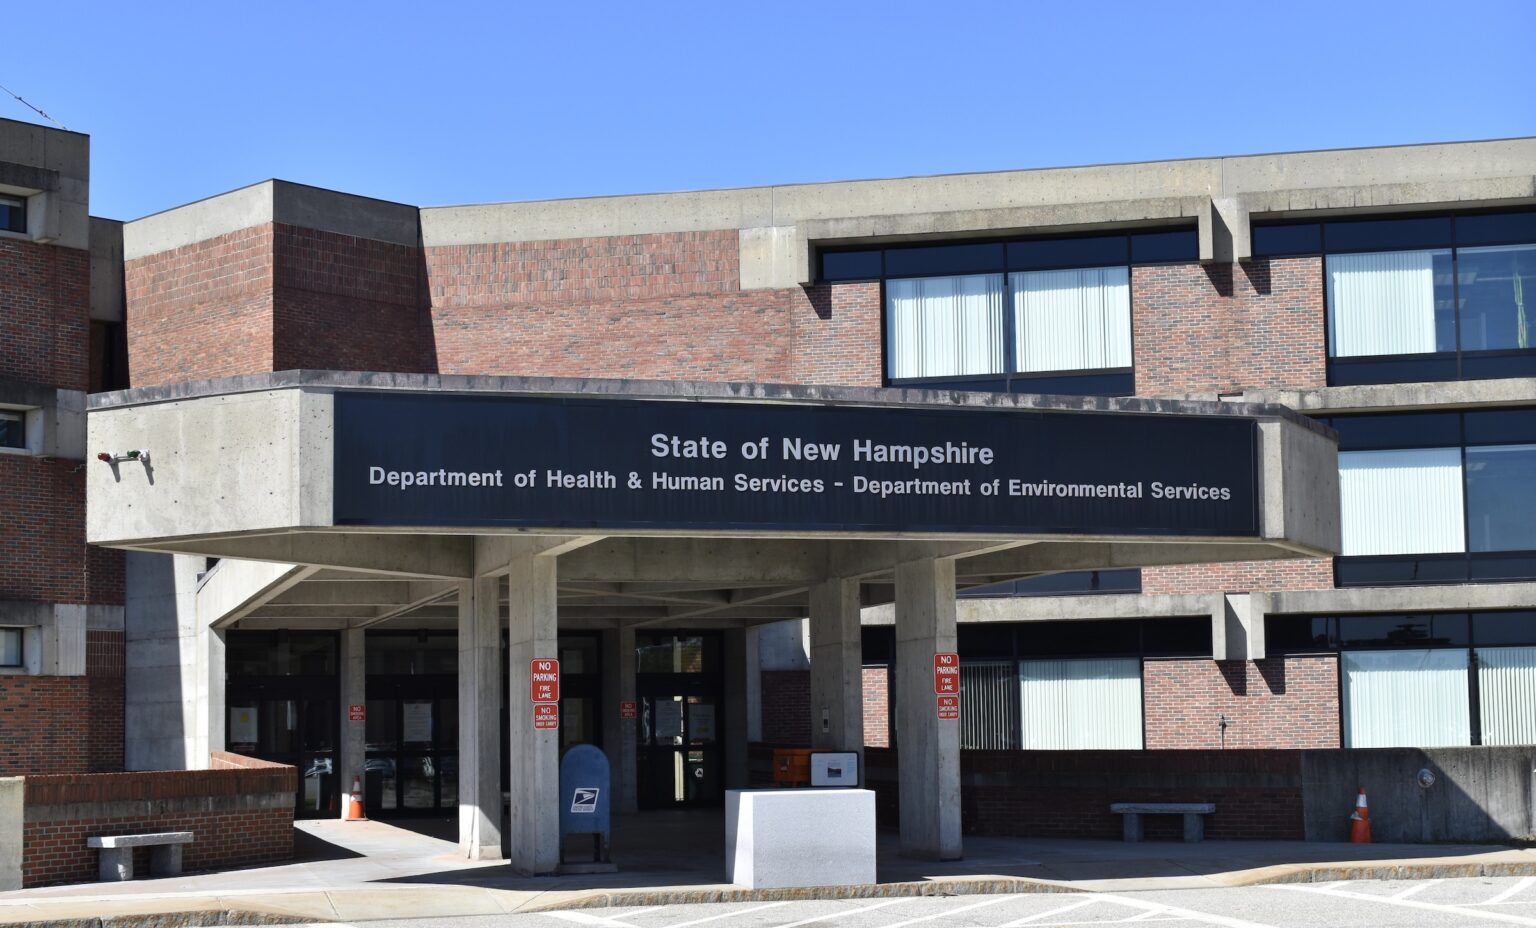 The New Hampshire Department of Health and Human Services